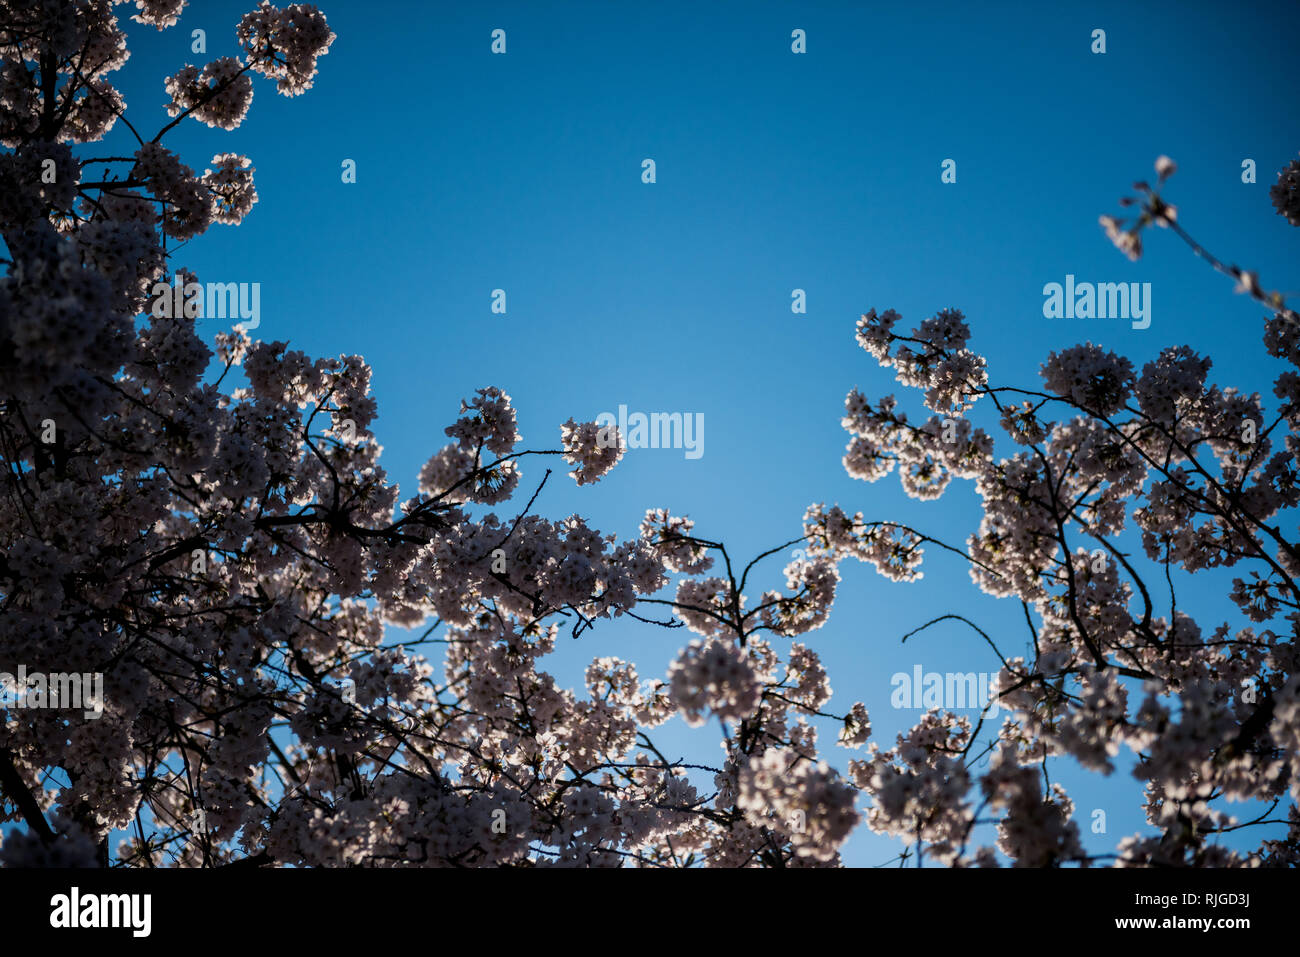 Beautiful cherry blossom sakura tree in bloom view from below with clear blue sky in the background Stock Photo